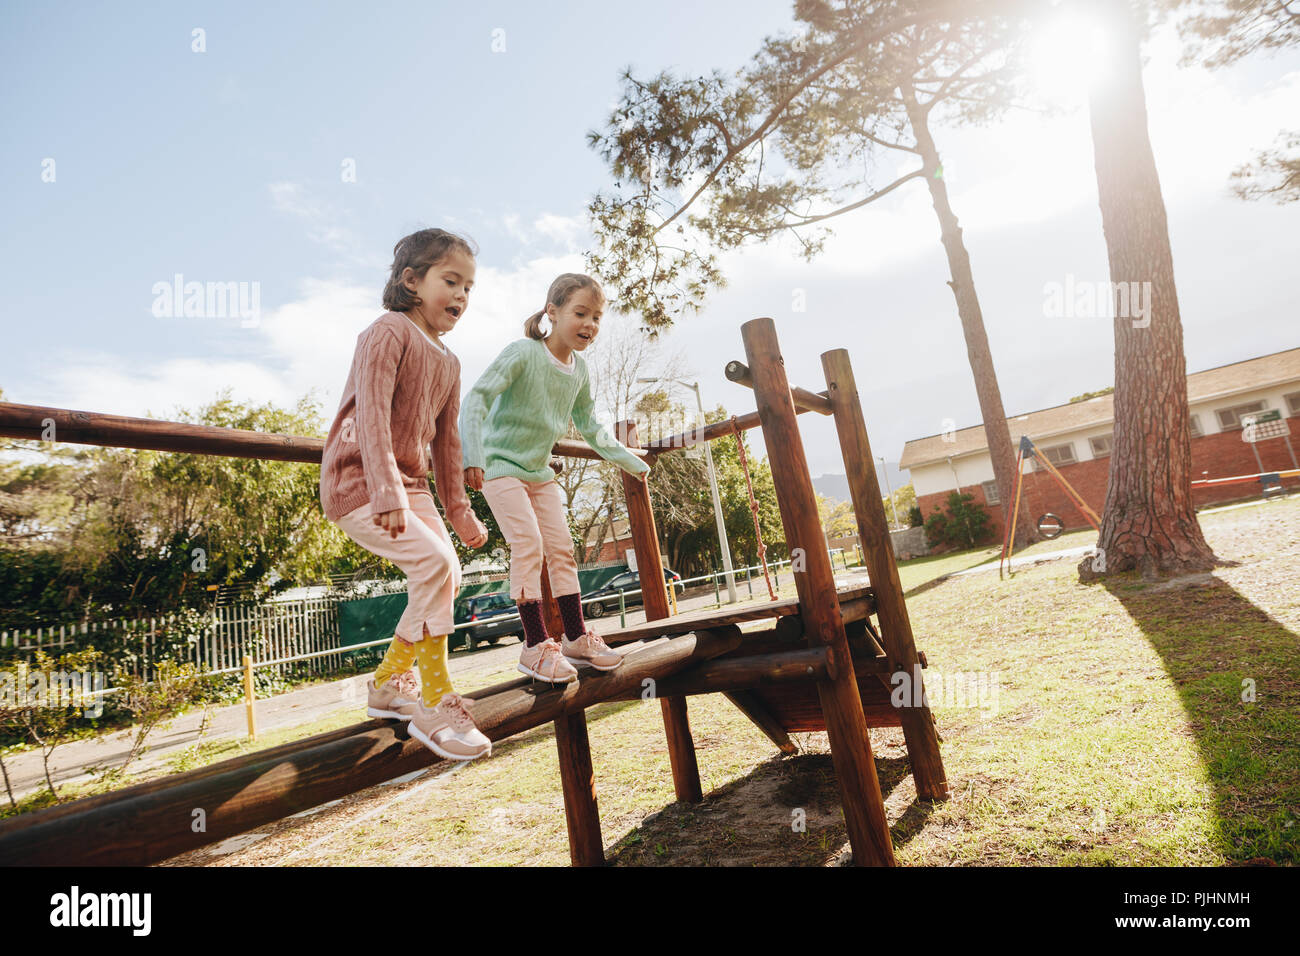 Cute little girls having fun on outdoor playground. Twin sisters jumping from wooden log at the park on sunny day. Stock Photo